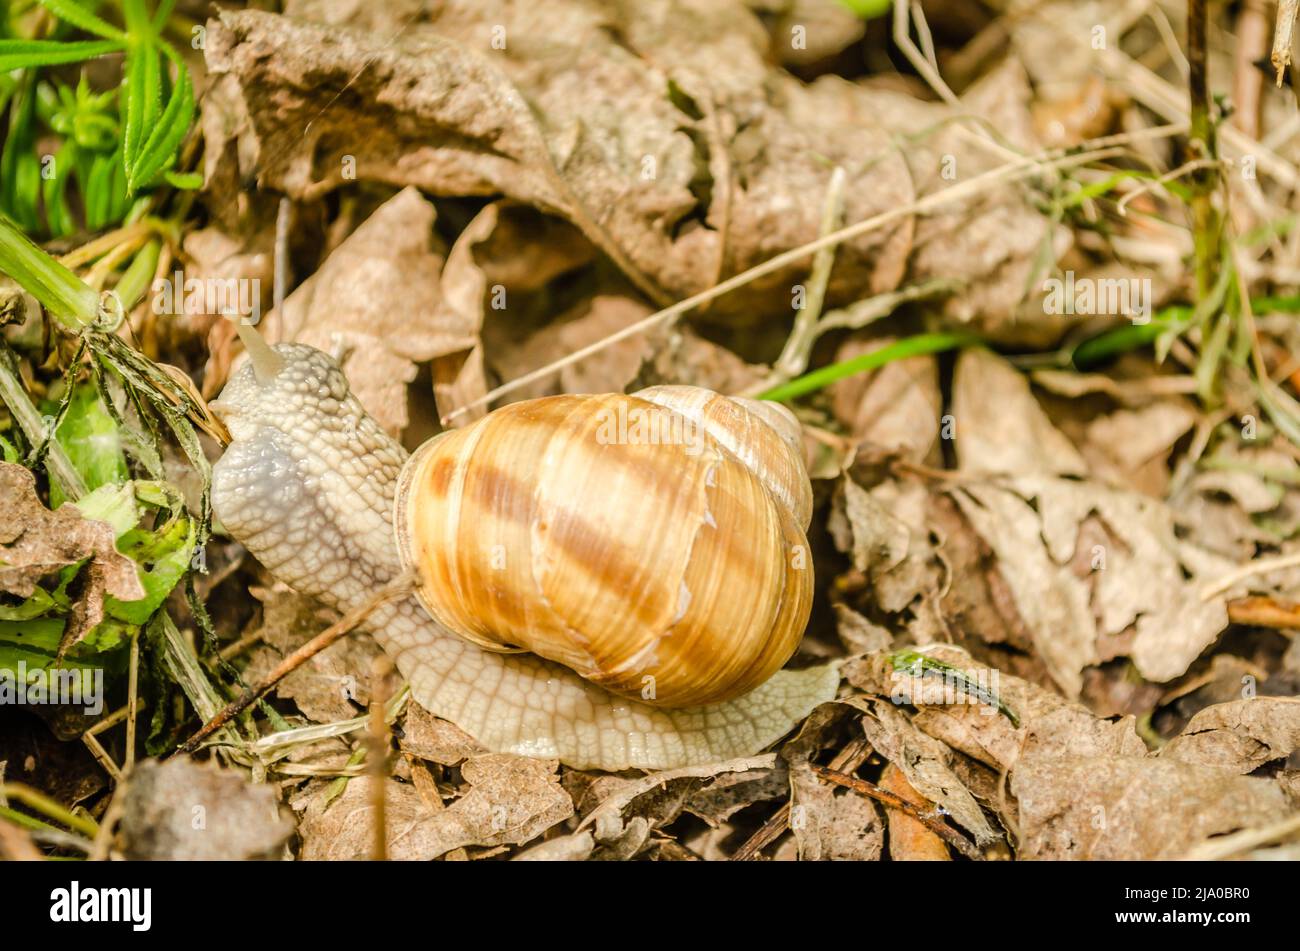 A field snail on dried yellow leaves in a green forest illuminated by the sun. Stock Photo